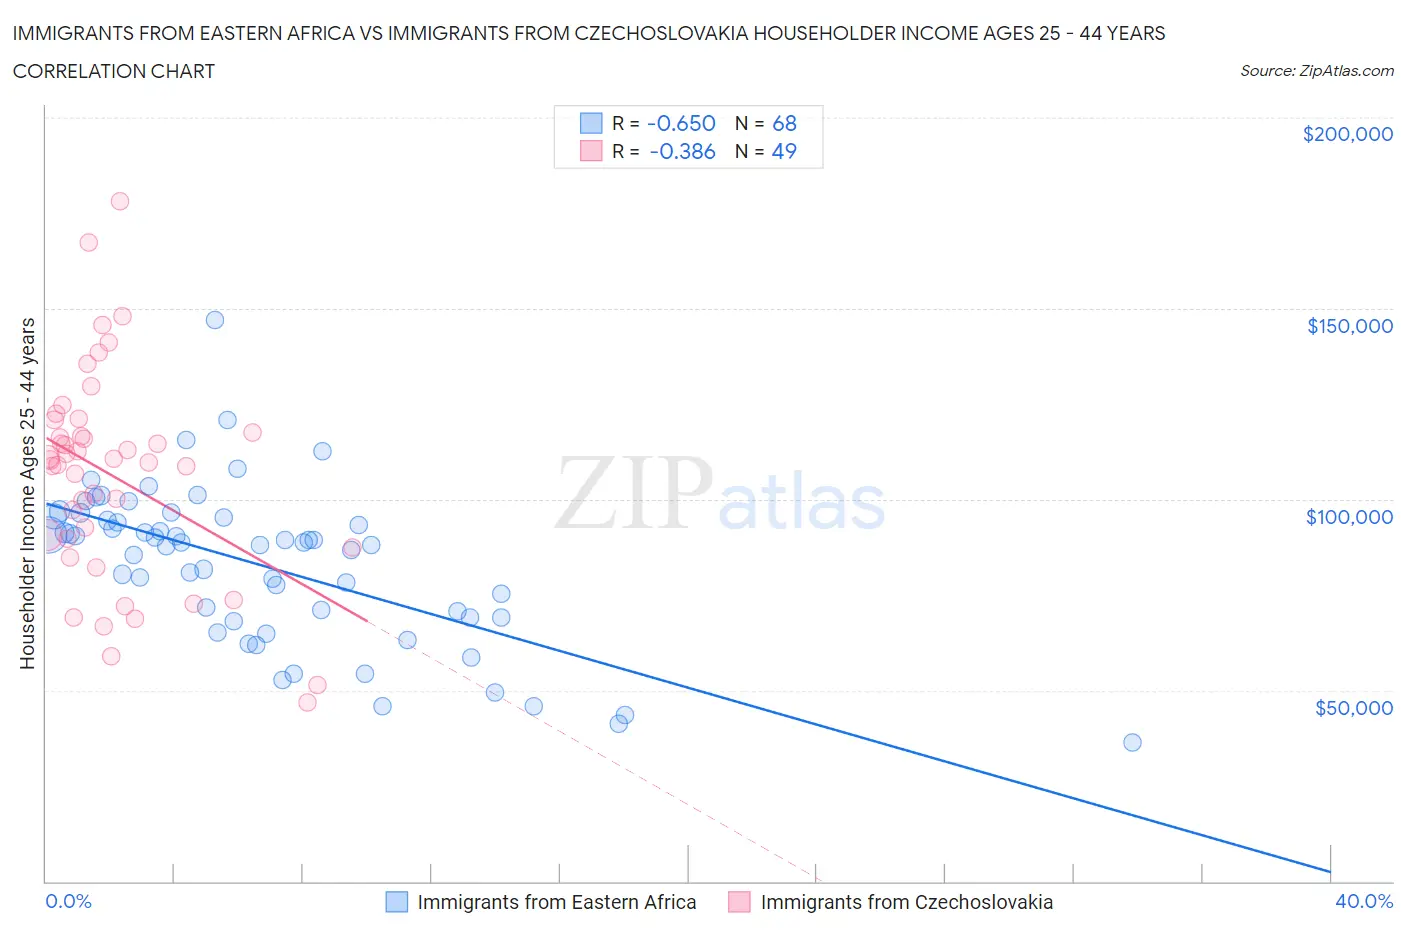 Immigrants from Eastern Africa vs Immigrants from Czechoslovakia Householder Income Ages 25 - 44 years